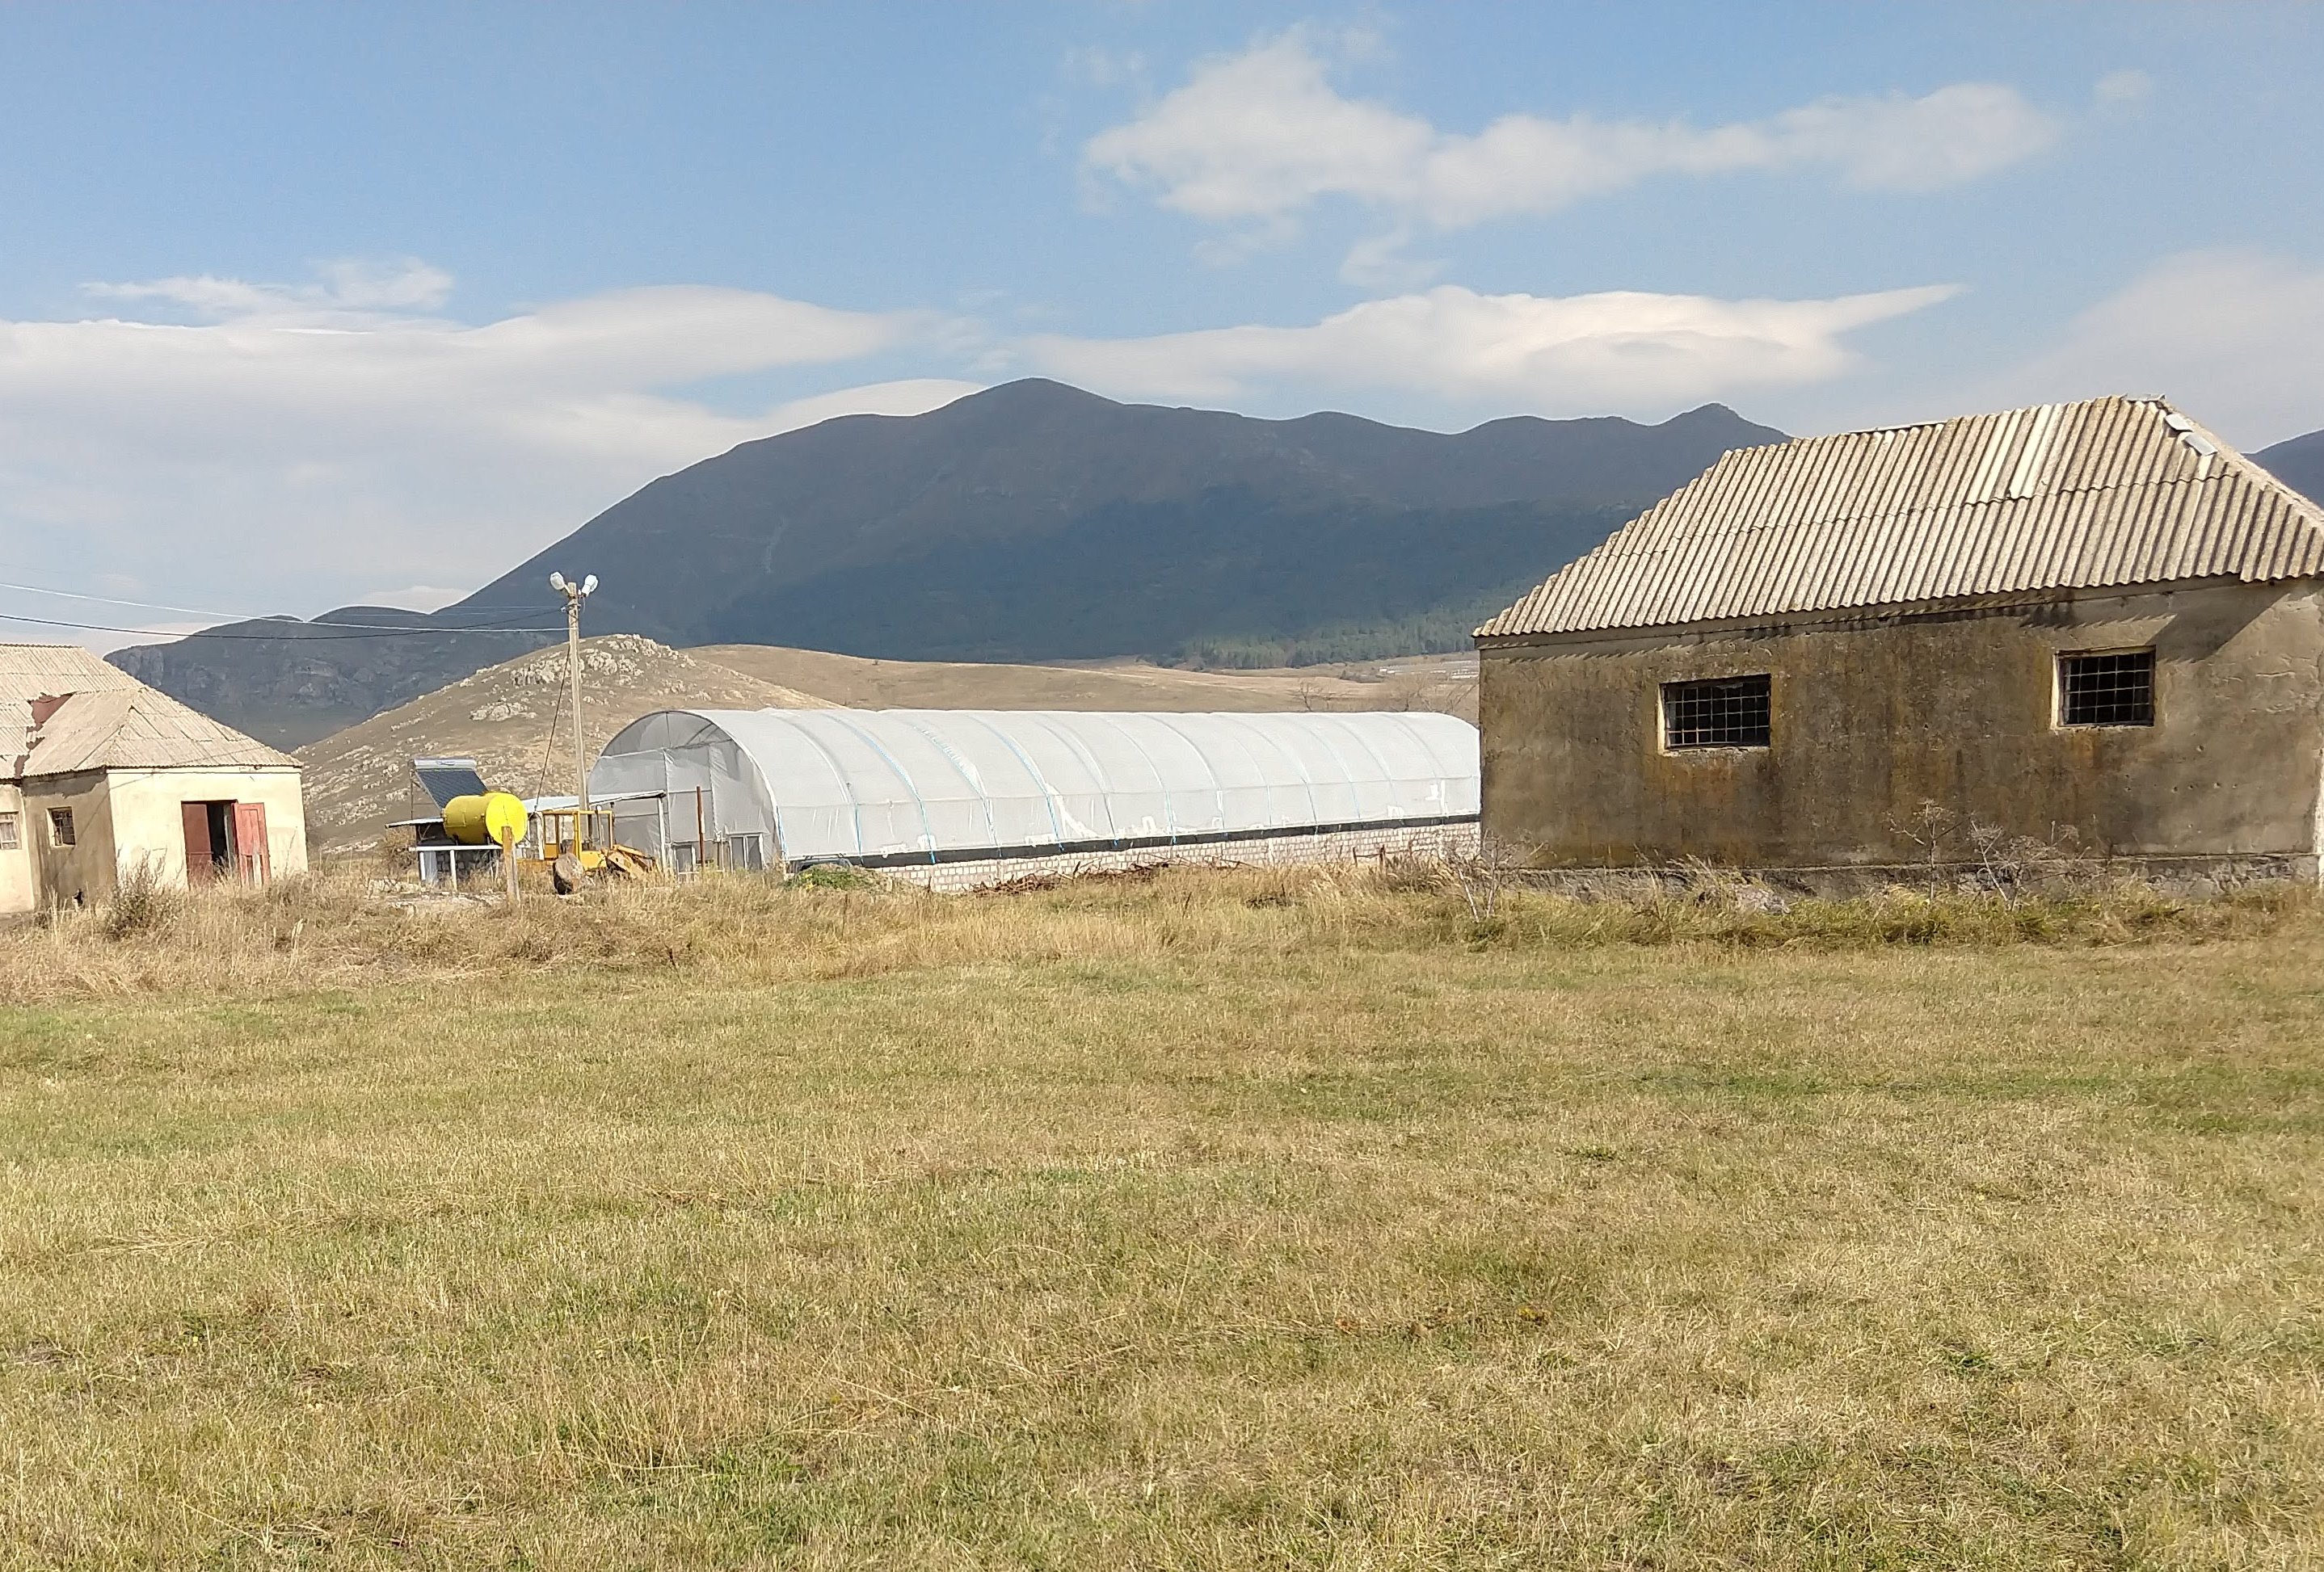 Mercy Projects Starts Dairy Farm and Christian School in Armenia to Minister to Locals